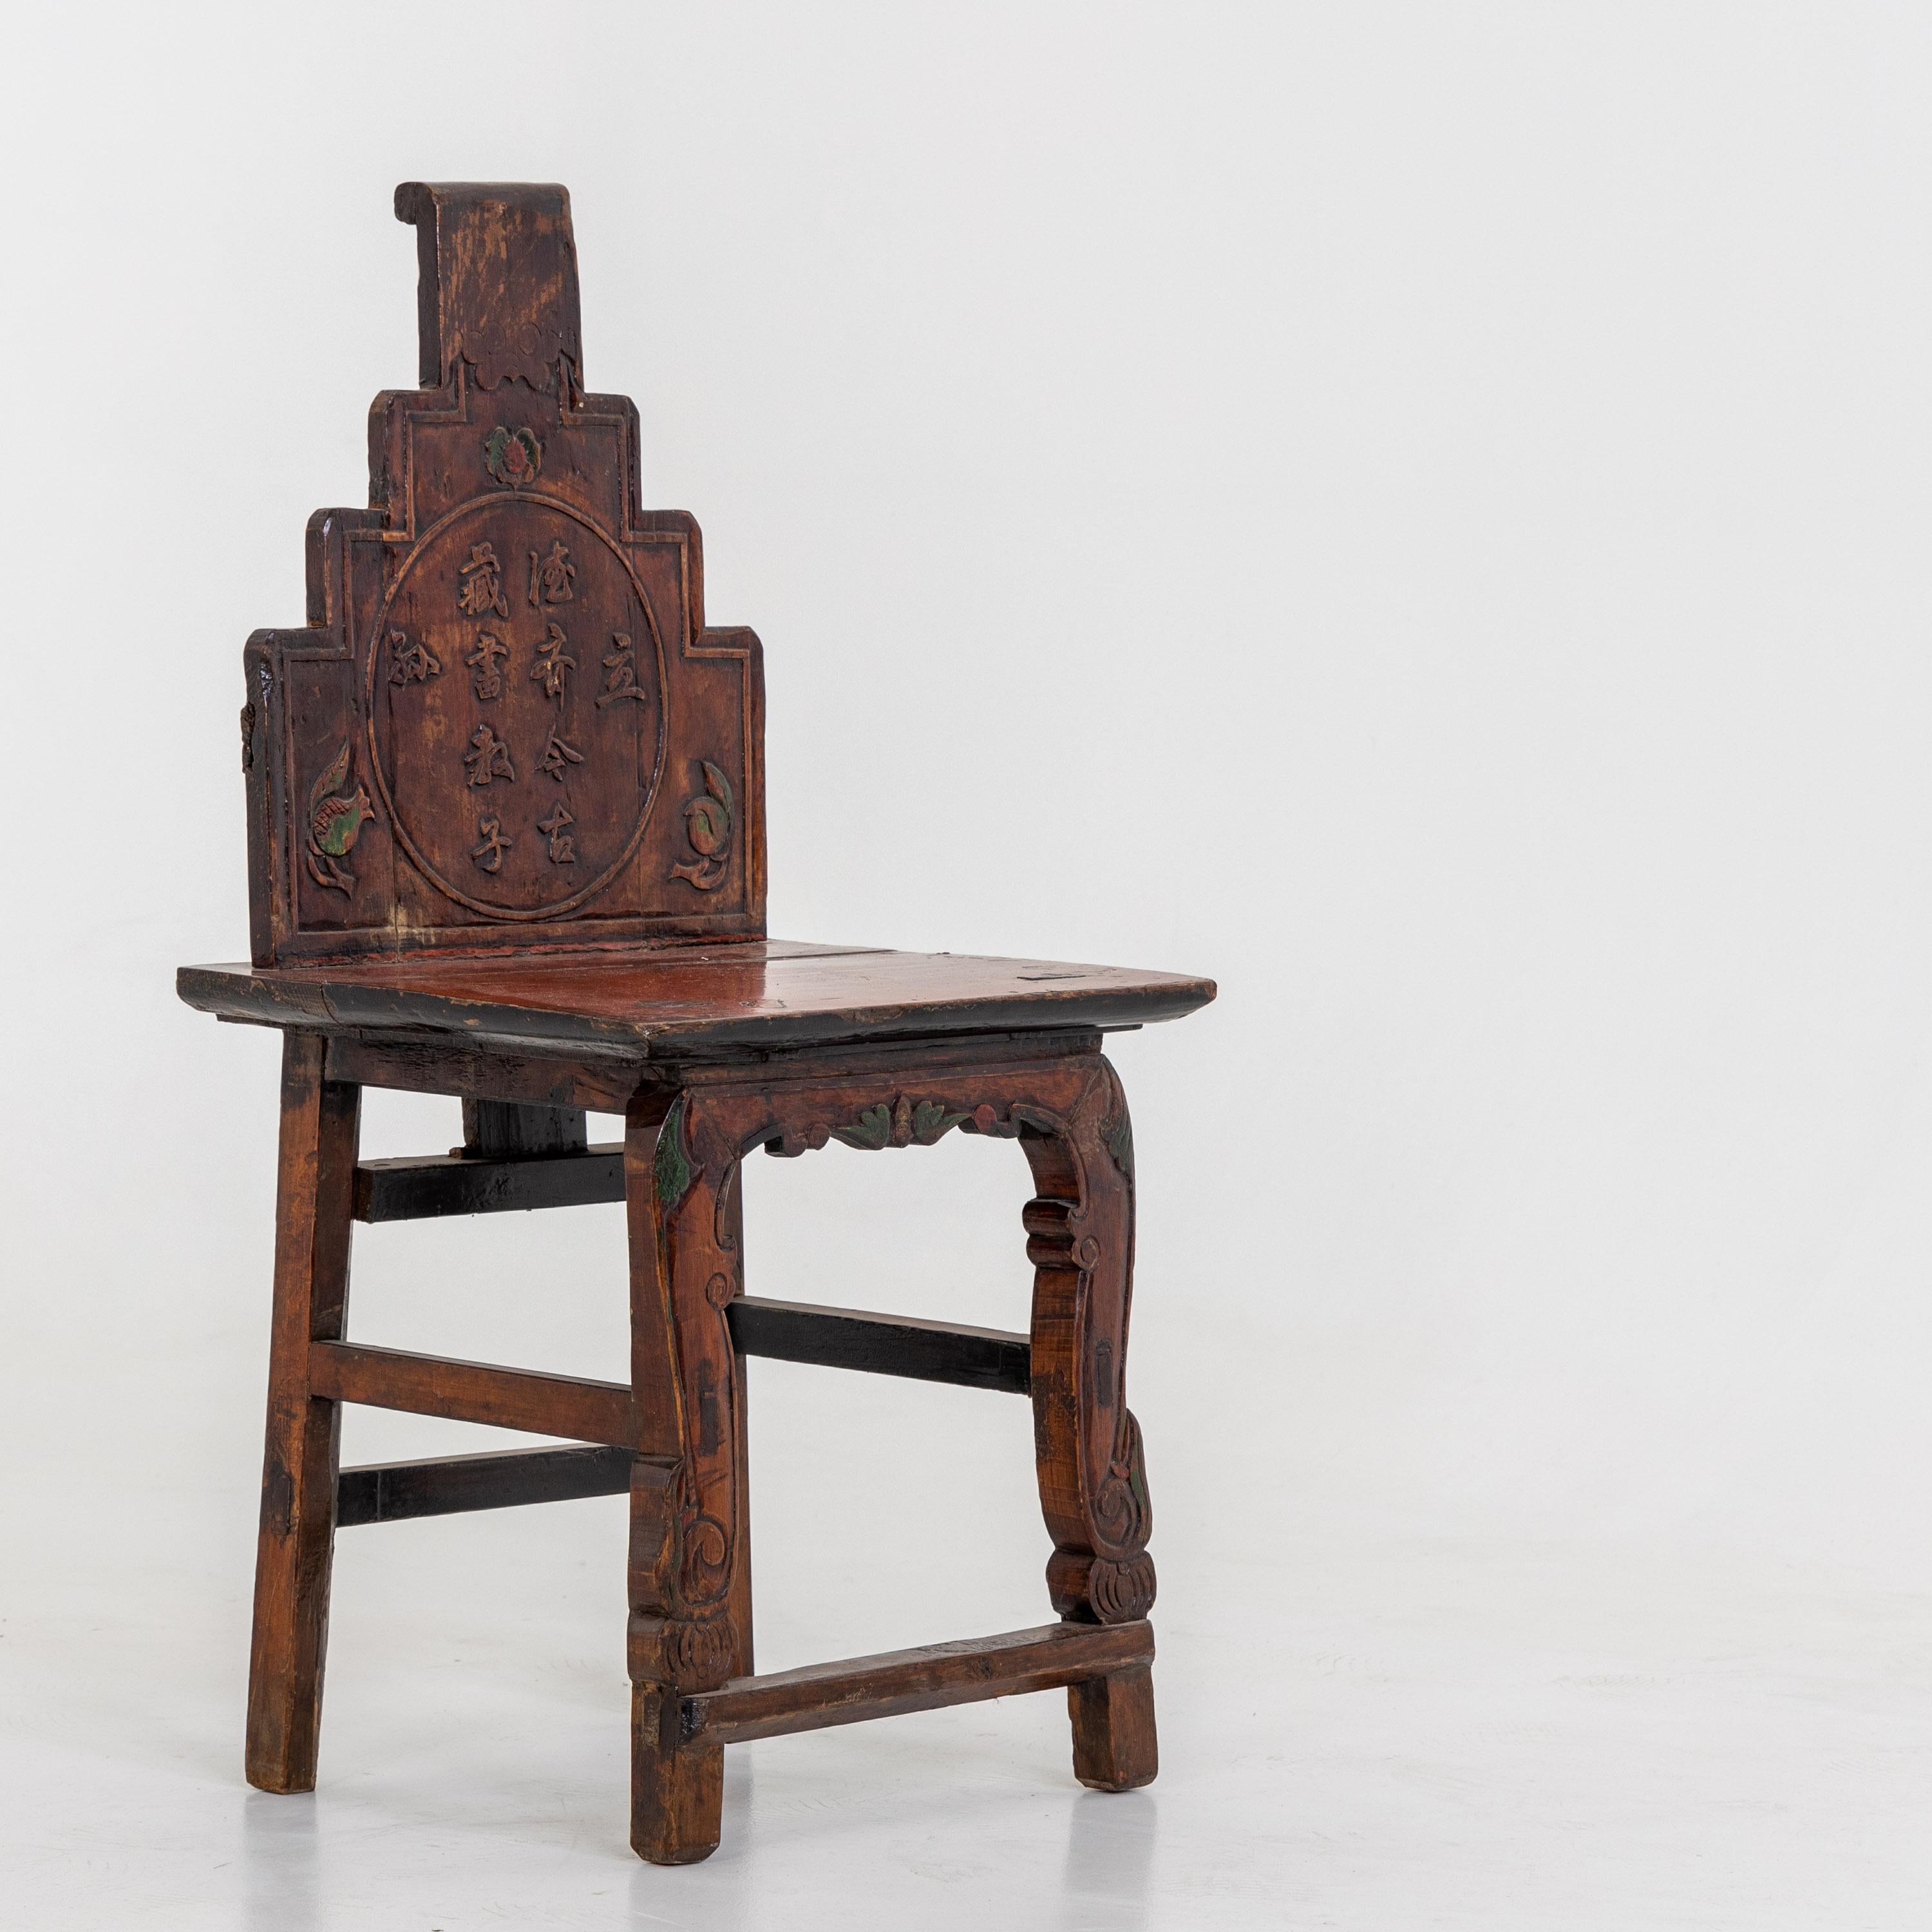 19th Century Pair of Chinese Wooden Chairs